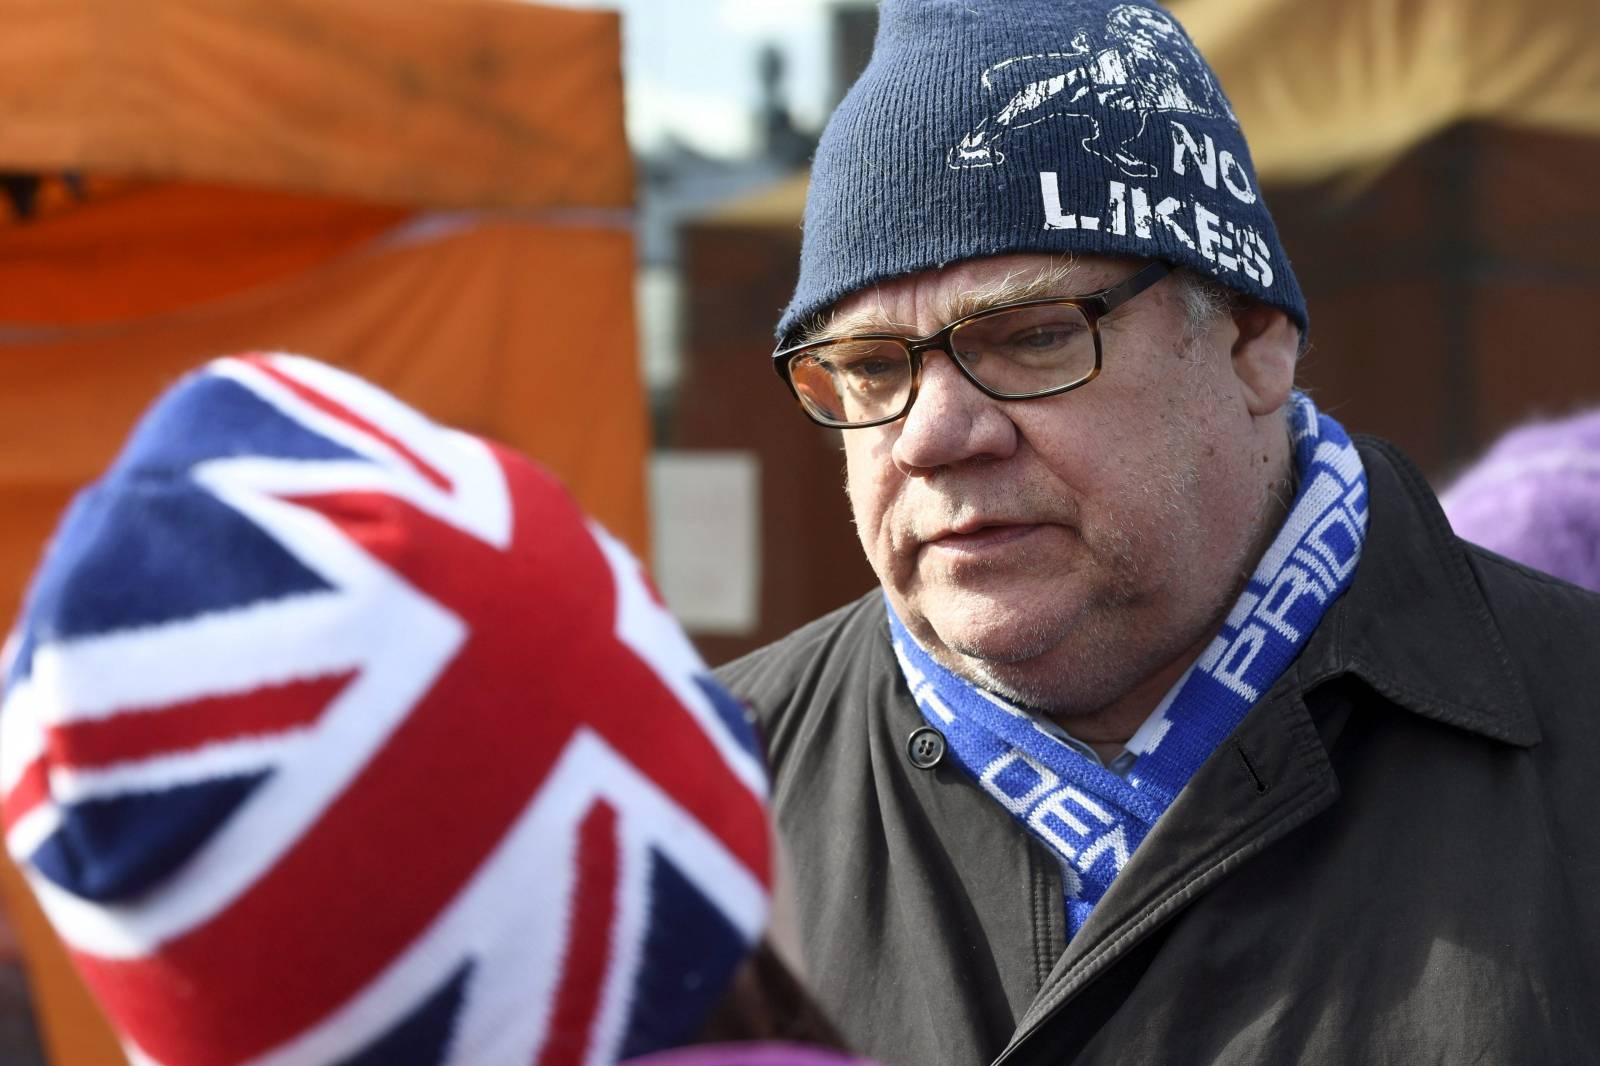 Finnish Foreign Minister Timo Soini is seen after an attempted attack at the Korson Maalaismarkkinat country fair in Vantaa